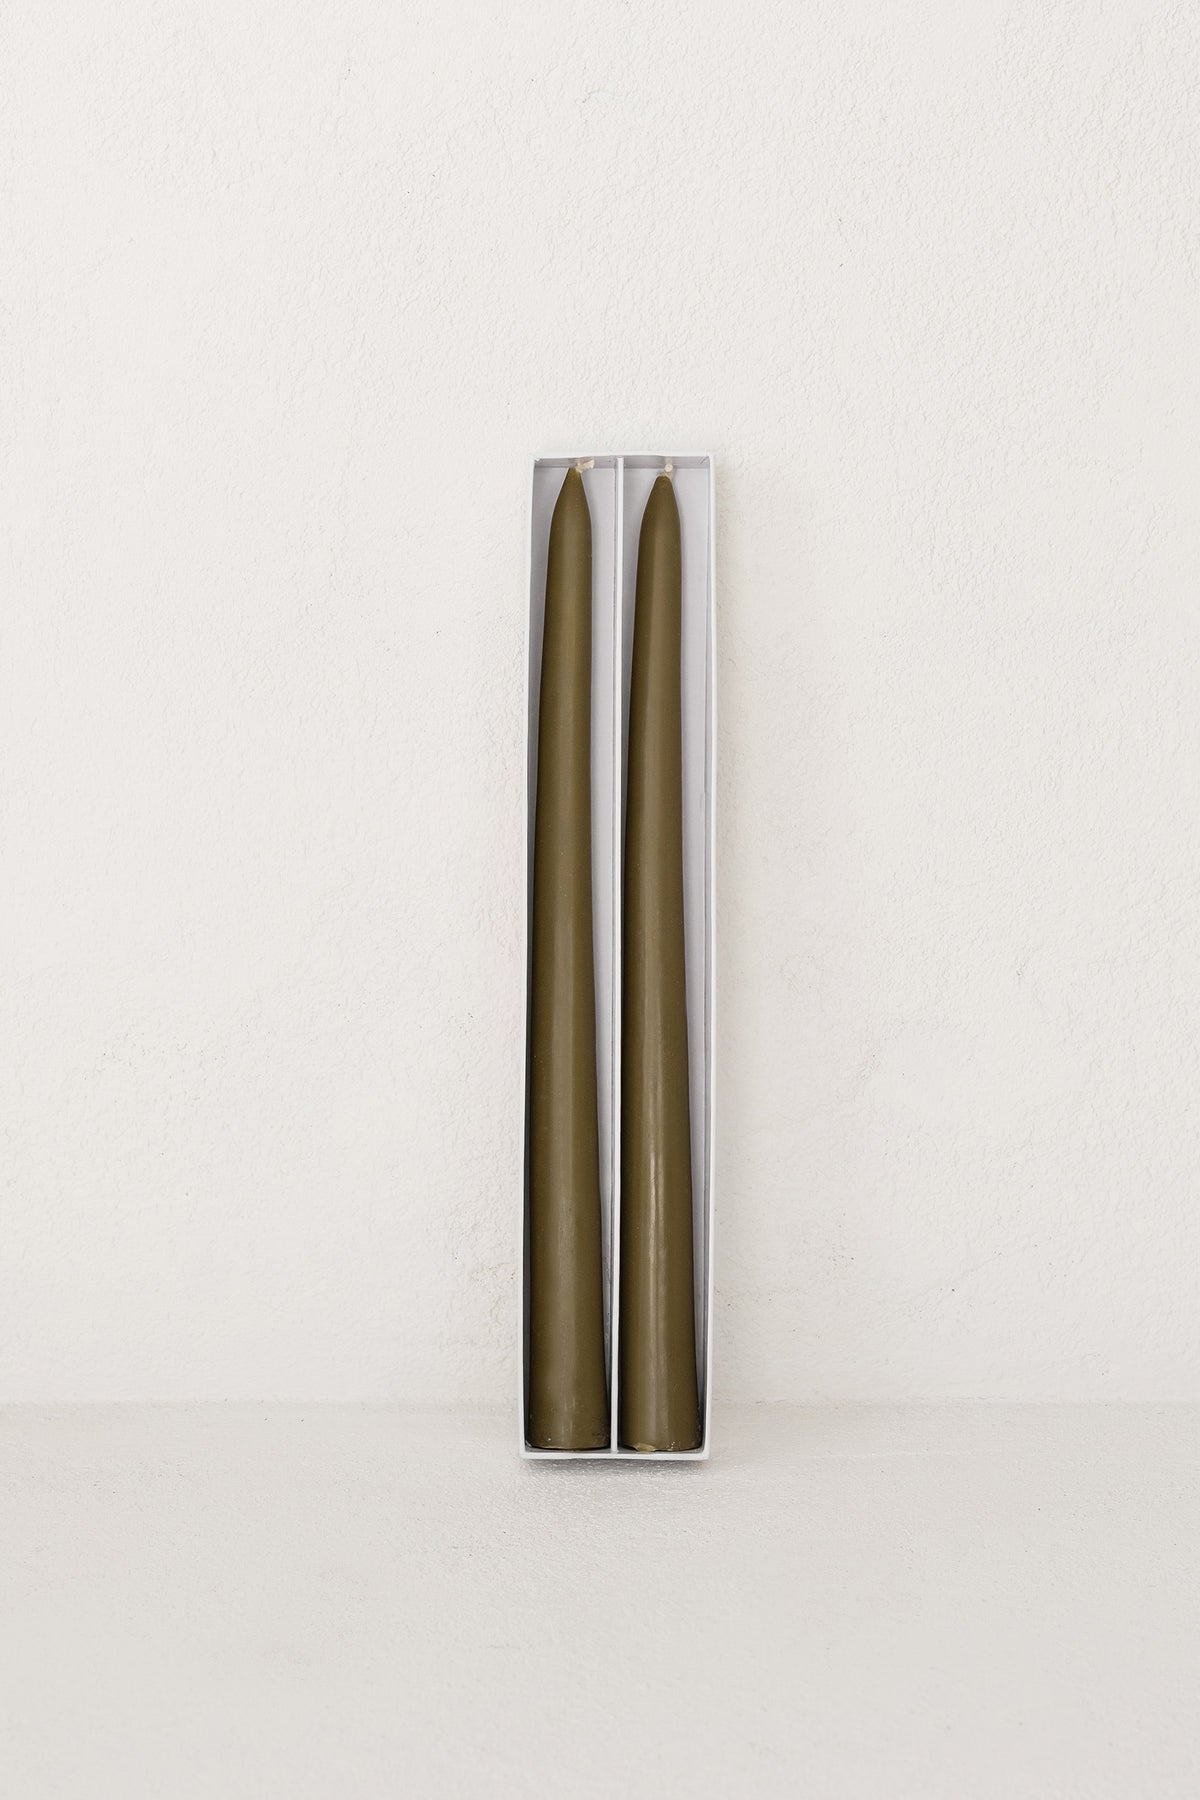 Tapered Candles - Olive